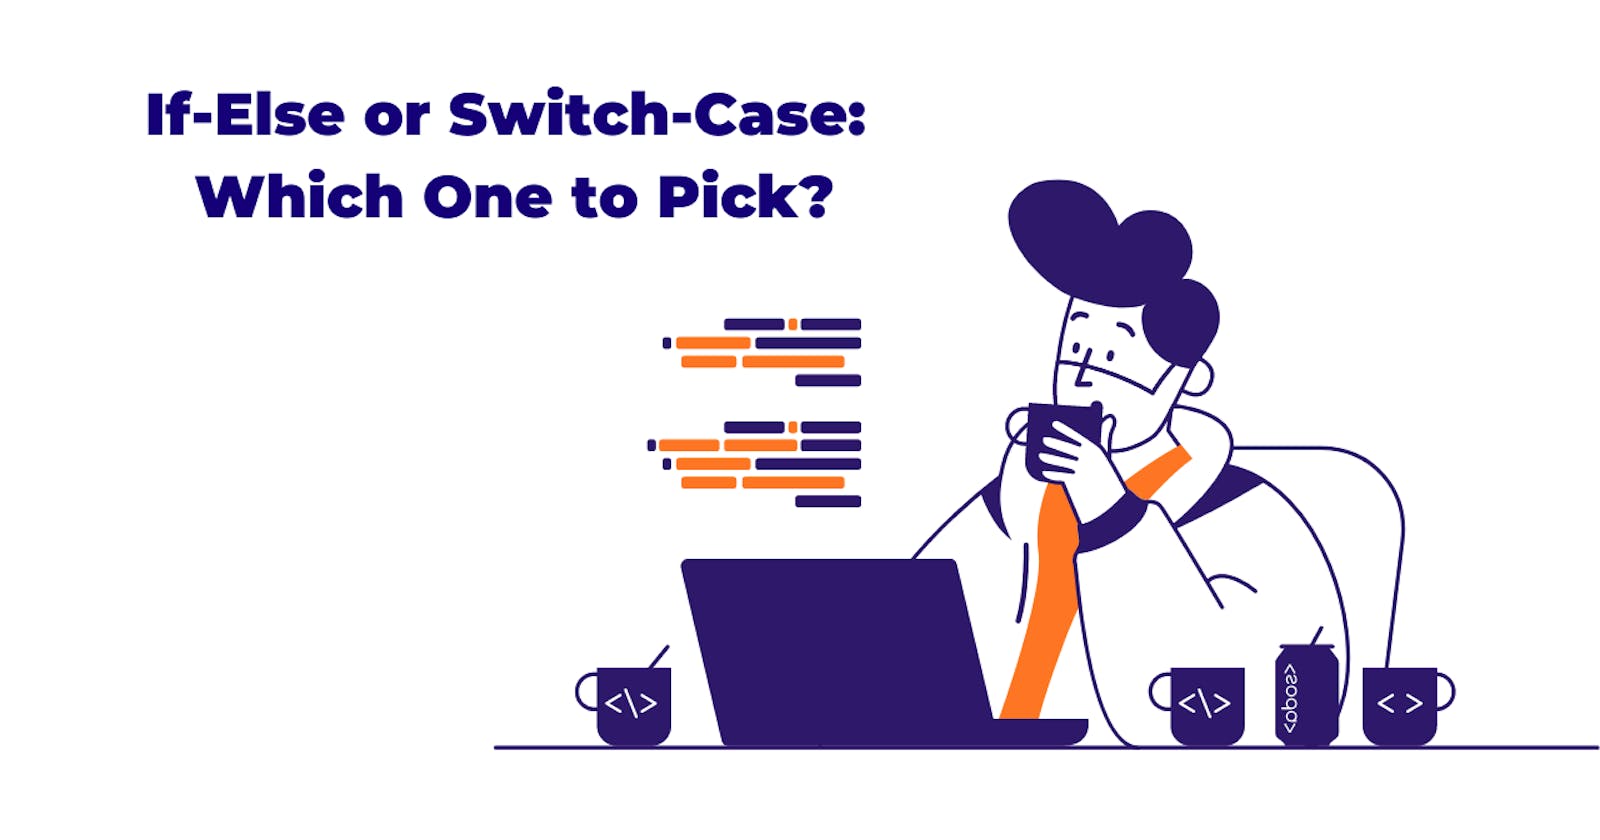 If-Else or Switch-Case: Which One to Pick?